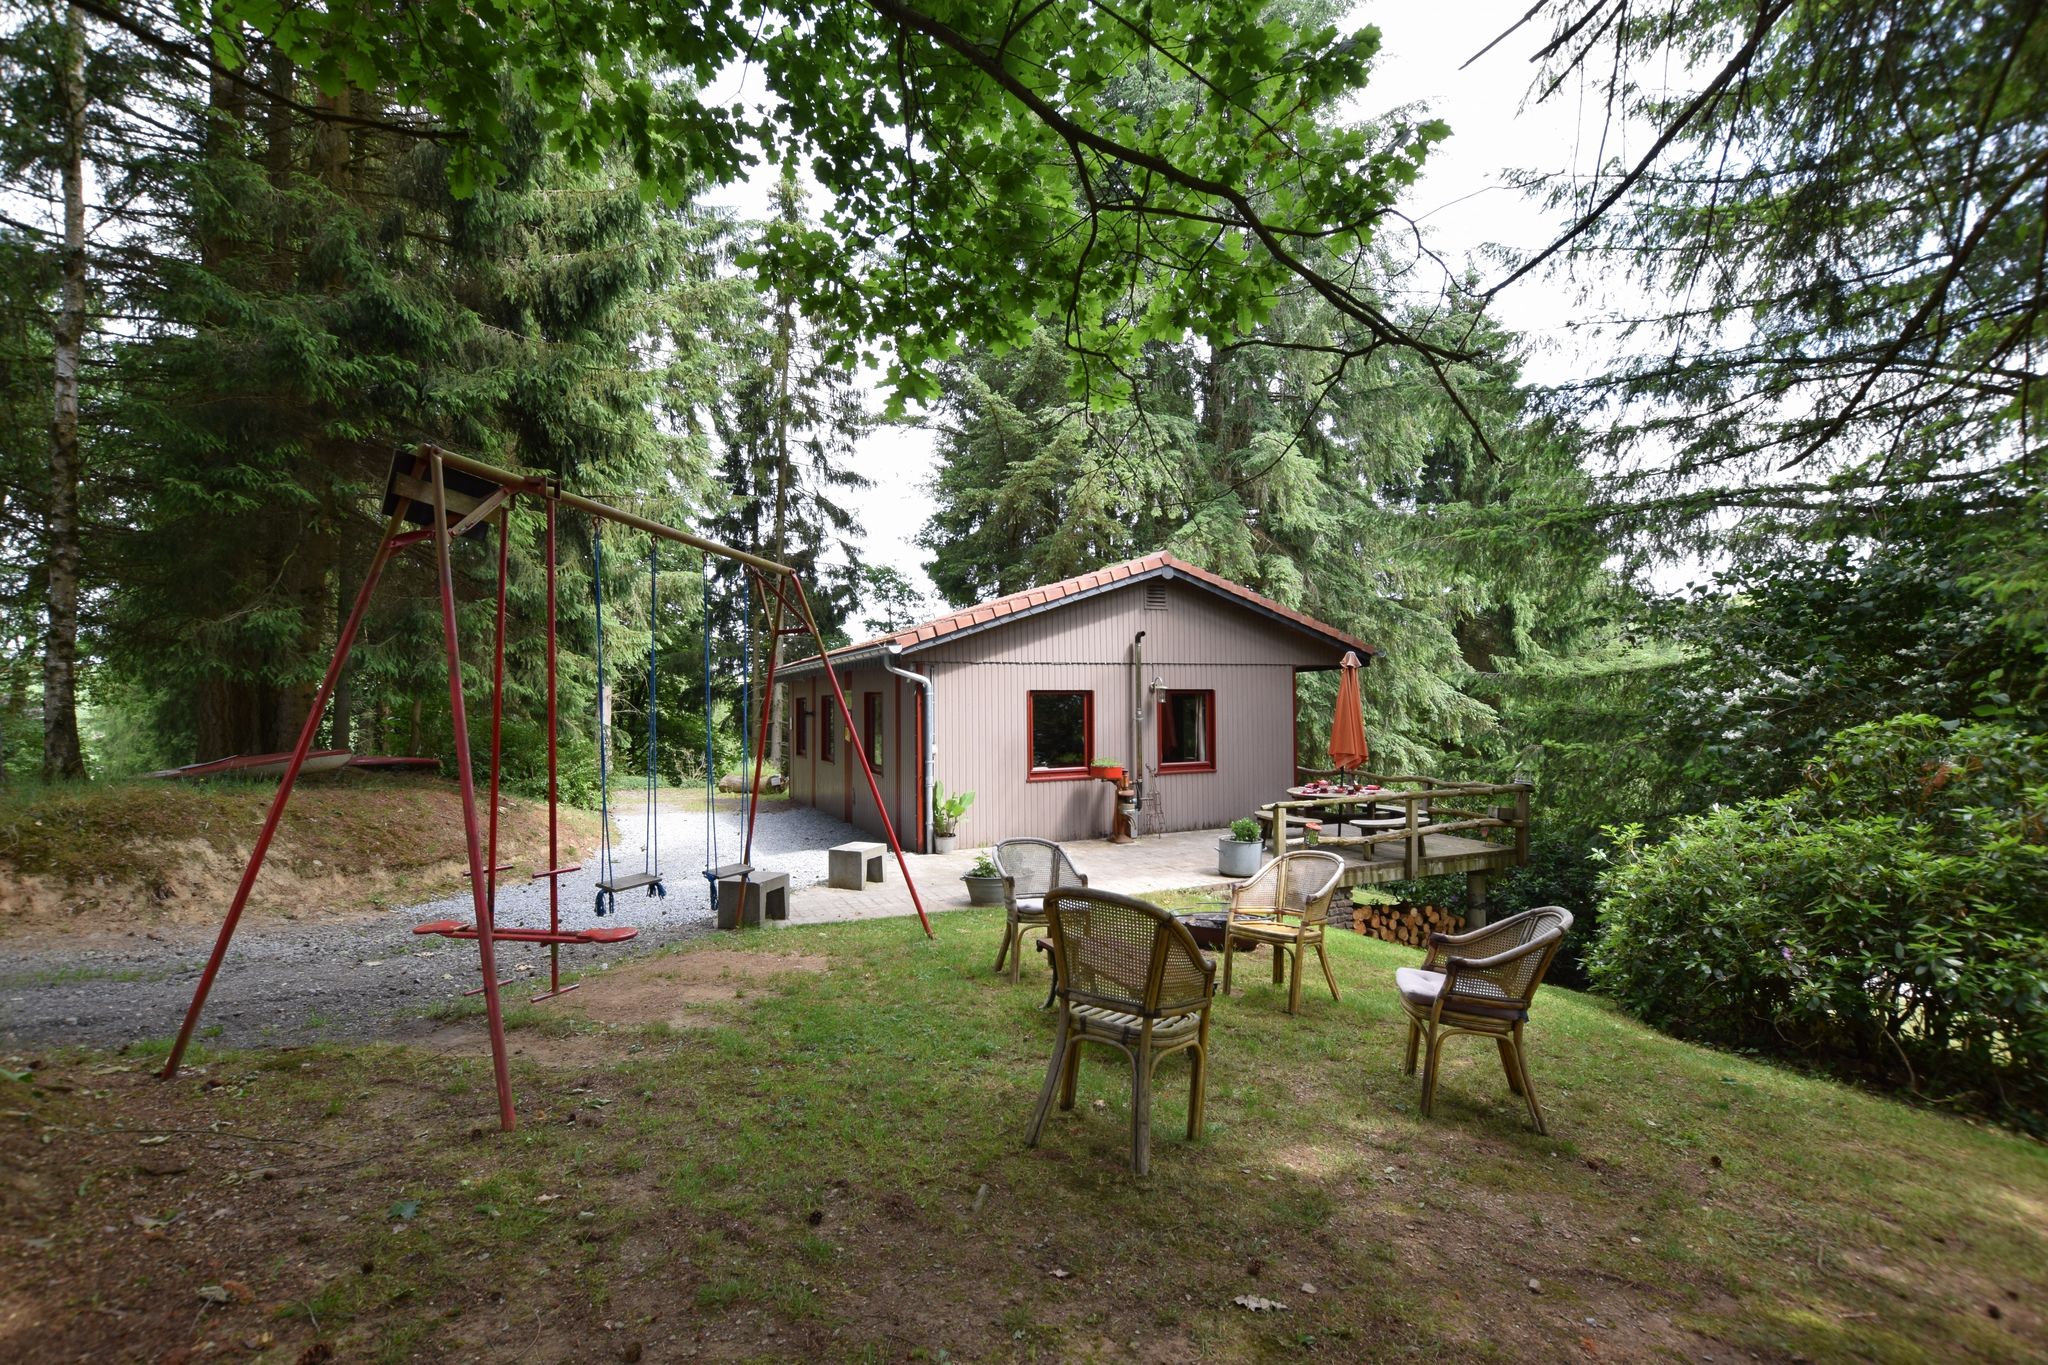 Chalet in a green and peaceful environment.